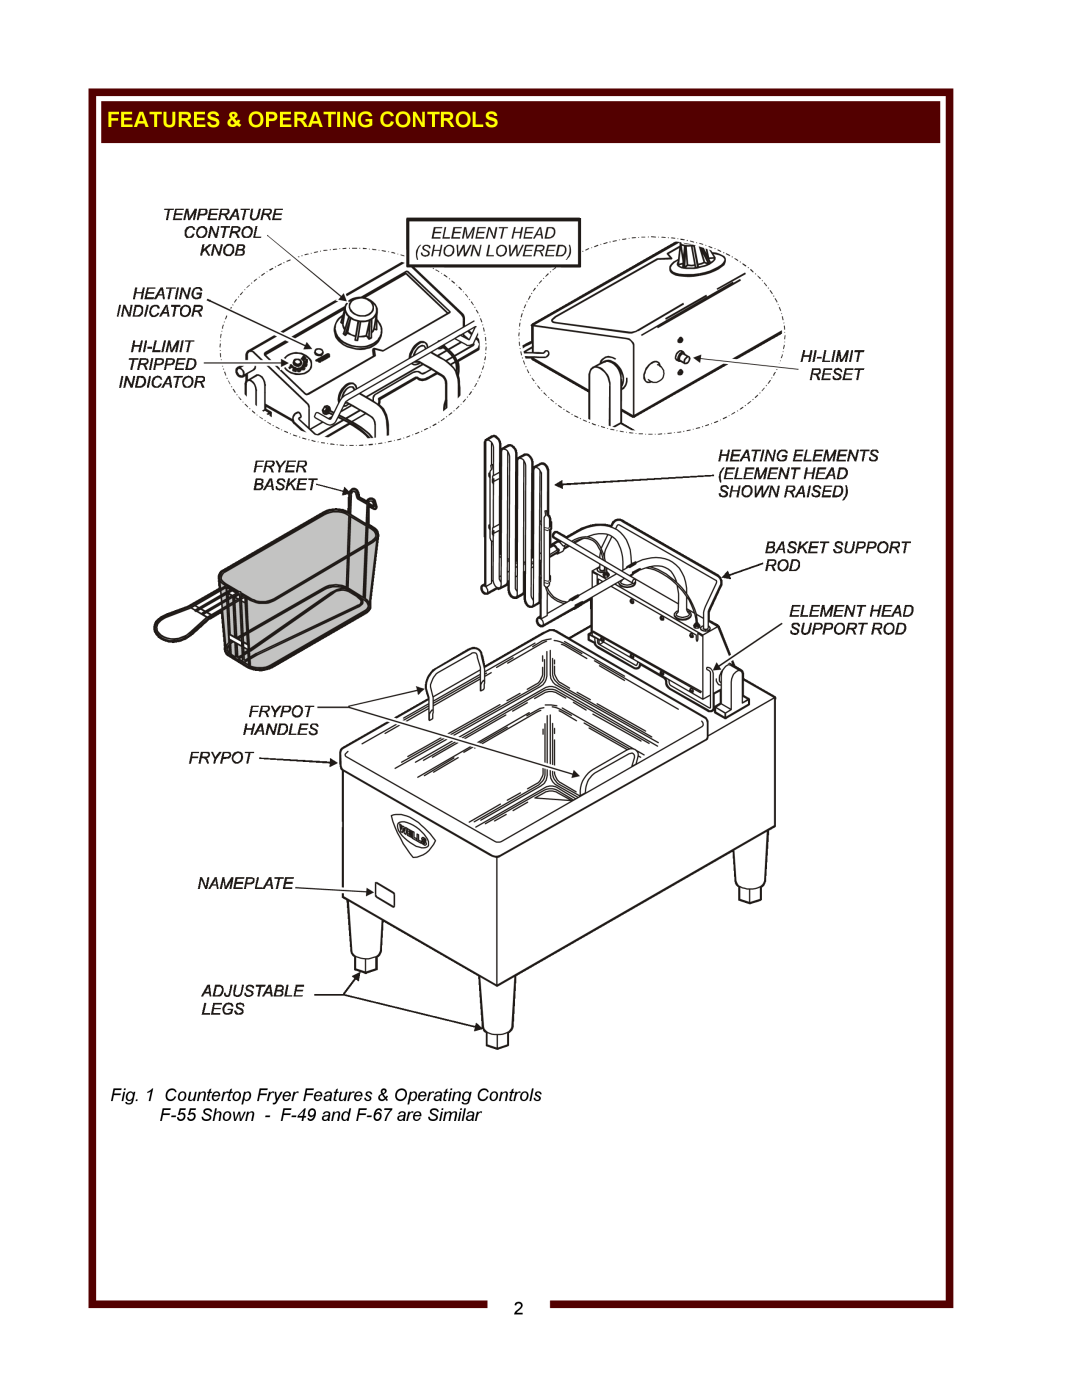 Wells operation manual Countertop Fryer Features & Operating Controls, F-55Shown - F-49and F-67are Similar 